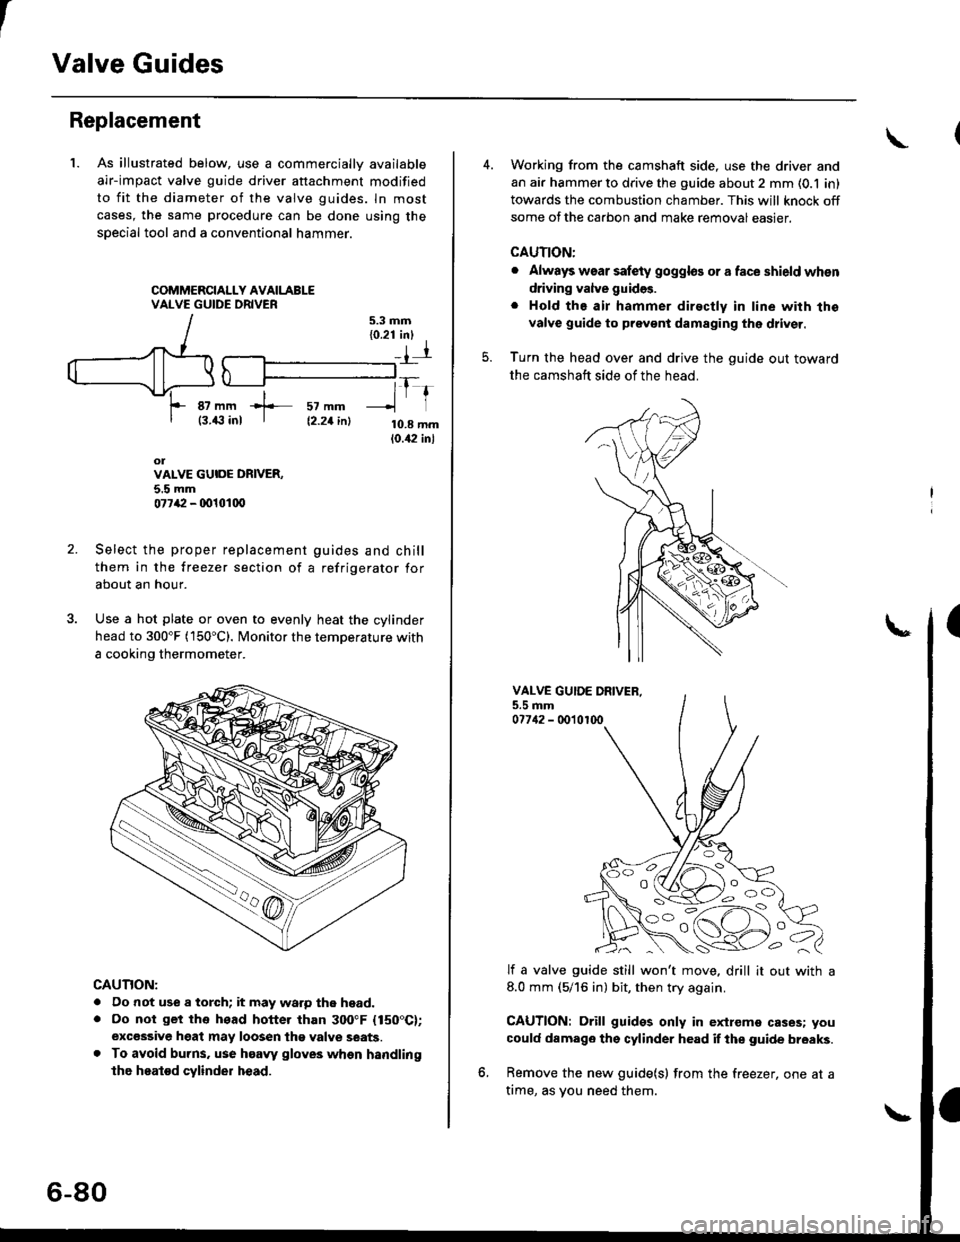 HONDA CIVIC 1996 6.G Workshop Manual t
Valve Guides
Replacement
1. As illustrated below, use a commerciallv available
air-impact valve guide driver attachment modified
to fit the diameter of the valve guides. ln most
cases, the same proc